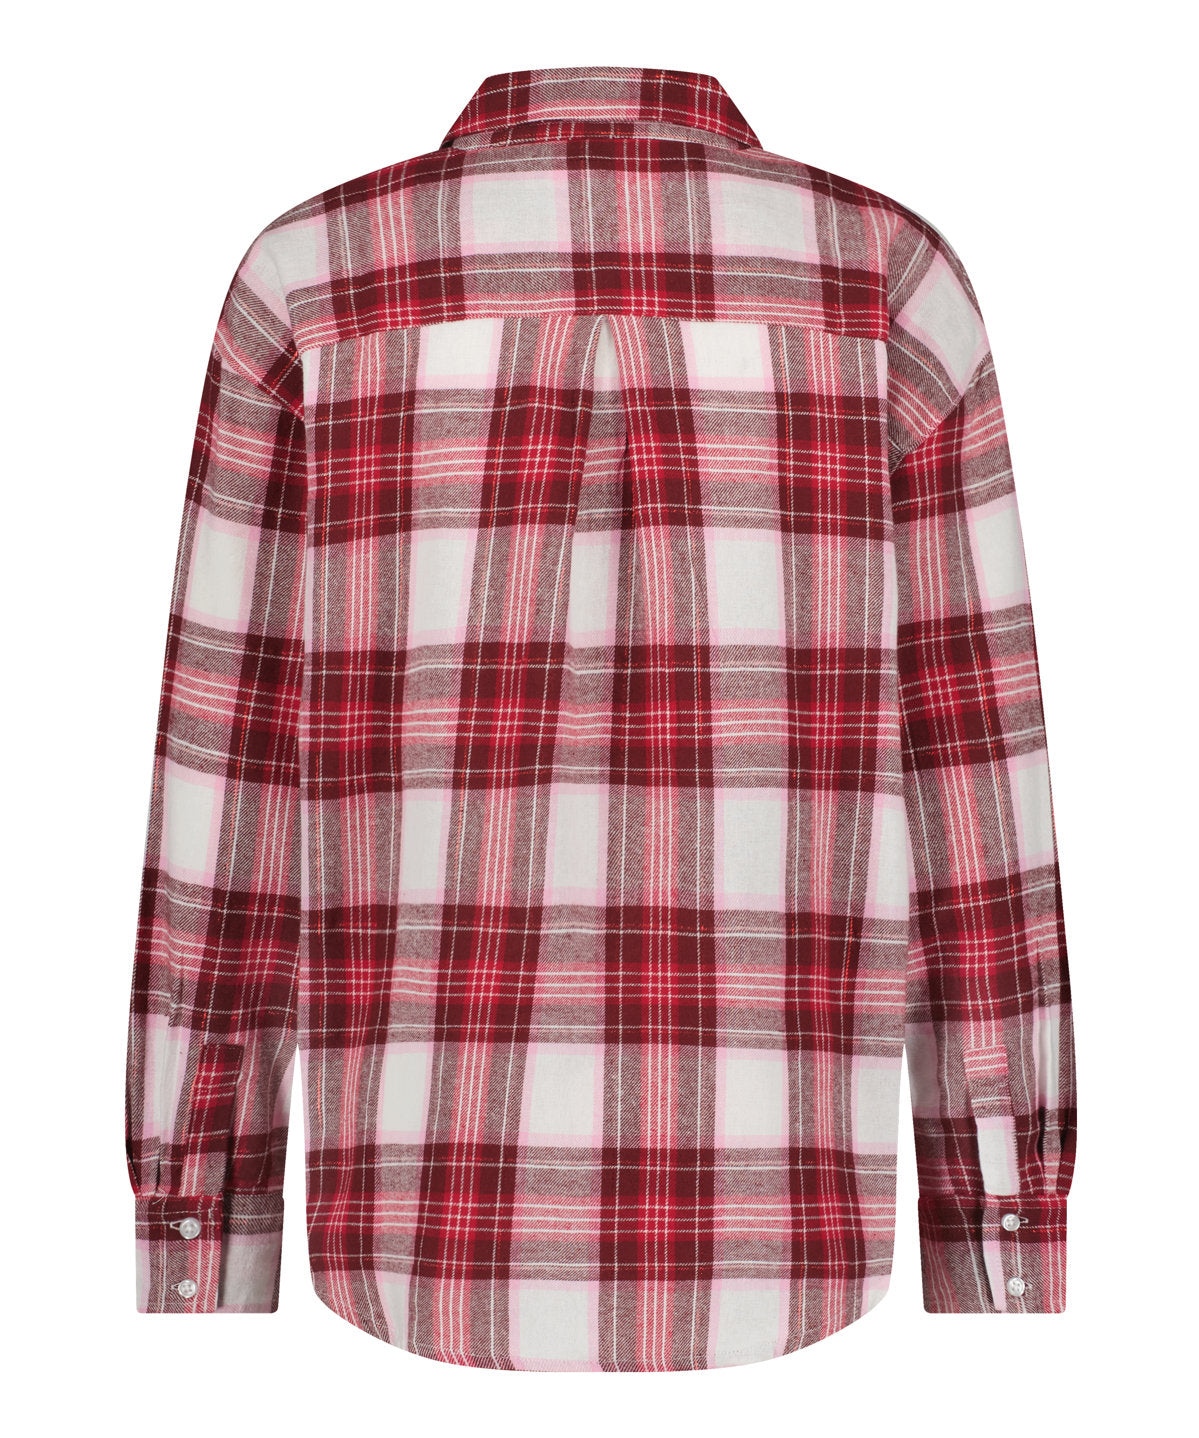 Jacket Flannel Long Sleeve Twill Check_204232_Cerise_06